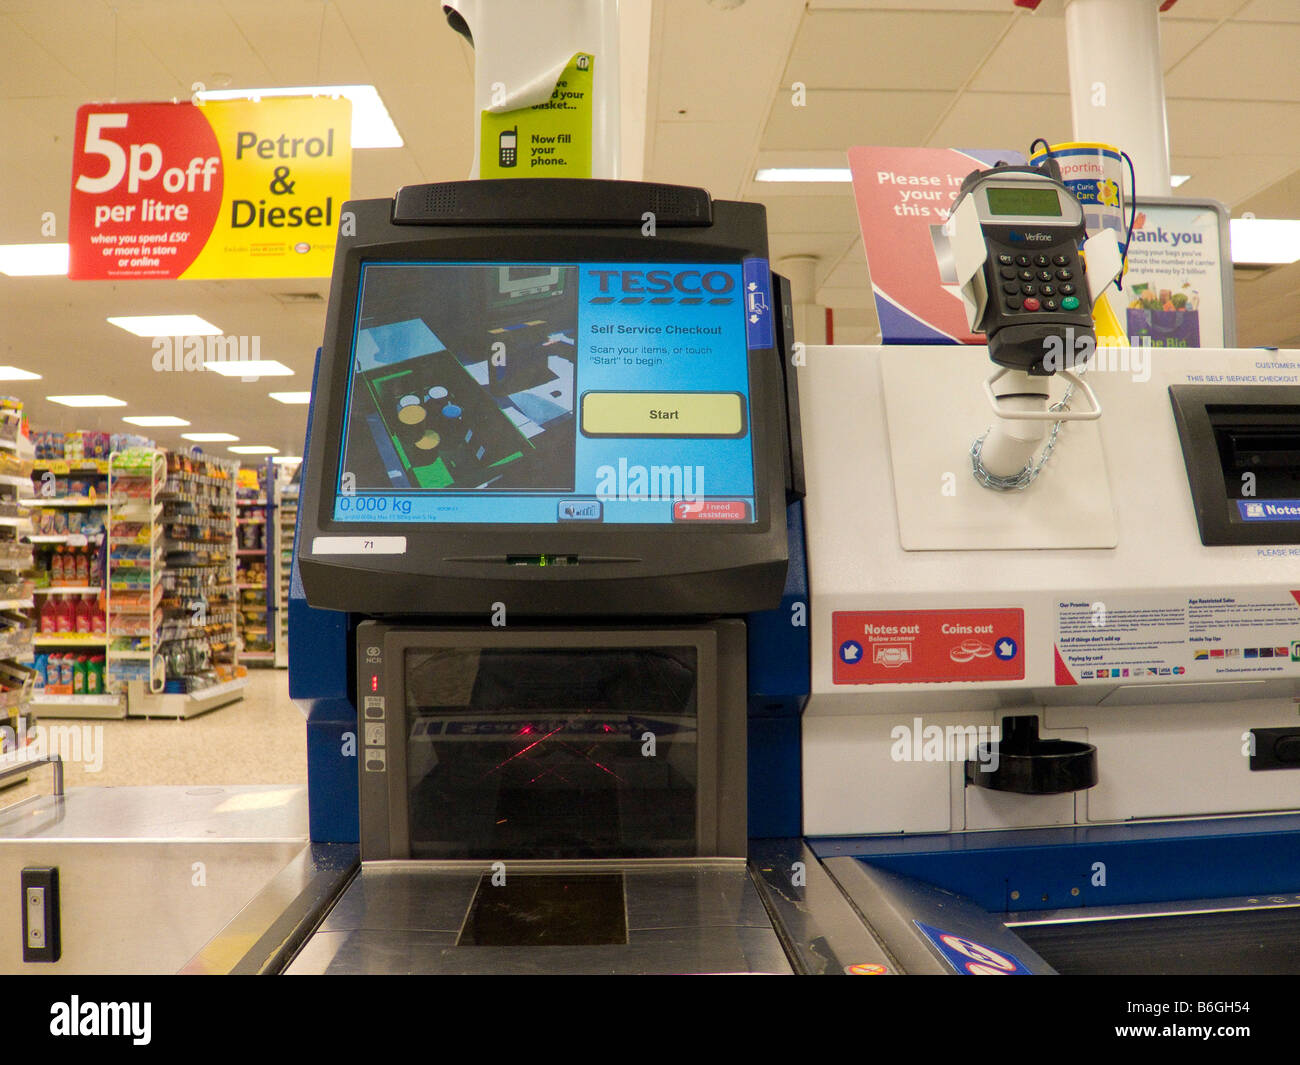 A self-service check-out at a supermarket Stock Photo